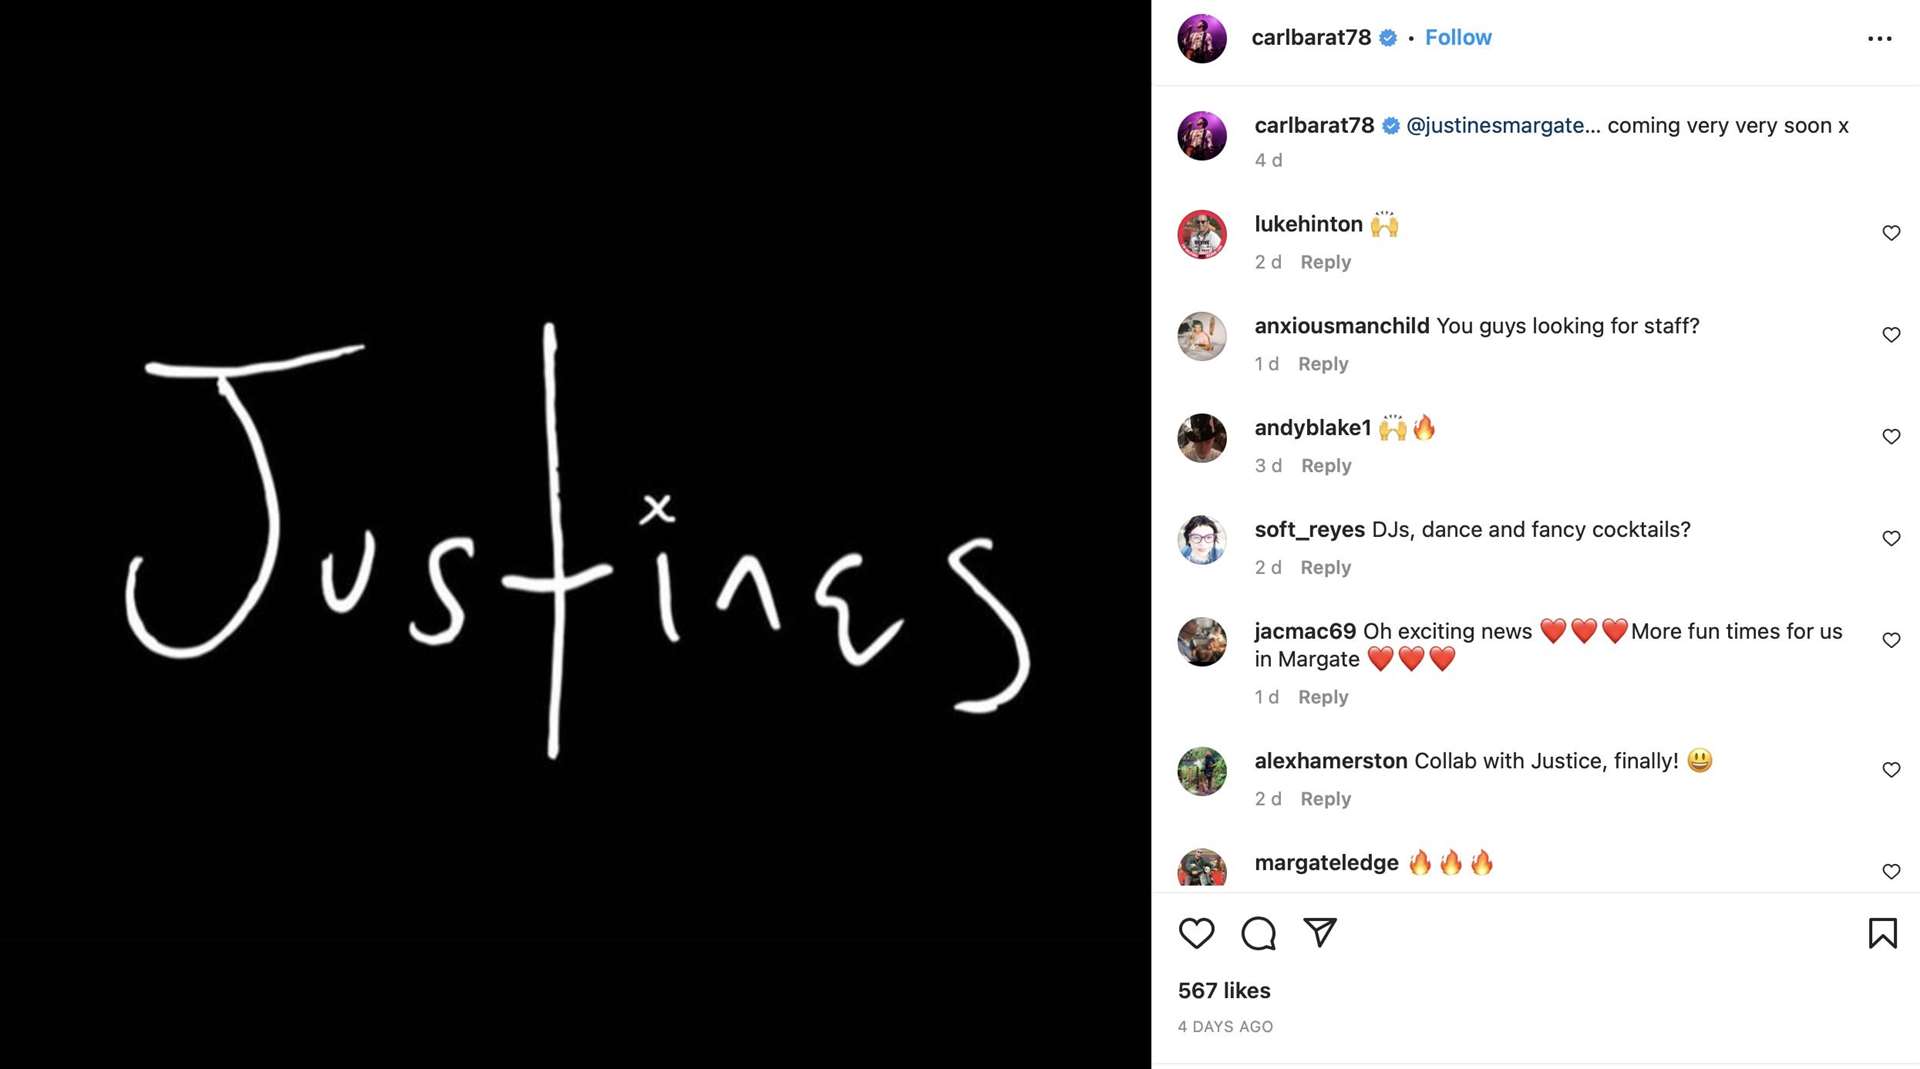 Carl Barât has been teasing Instagram fans over the arrival of his new music festival, Justine's. Picture:@carlbarat78/Instagram